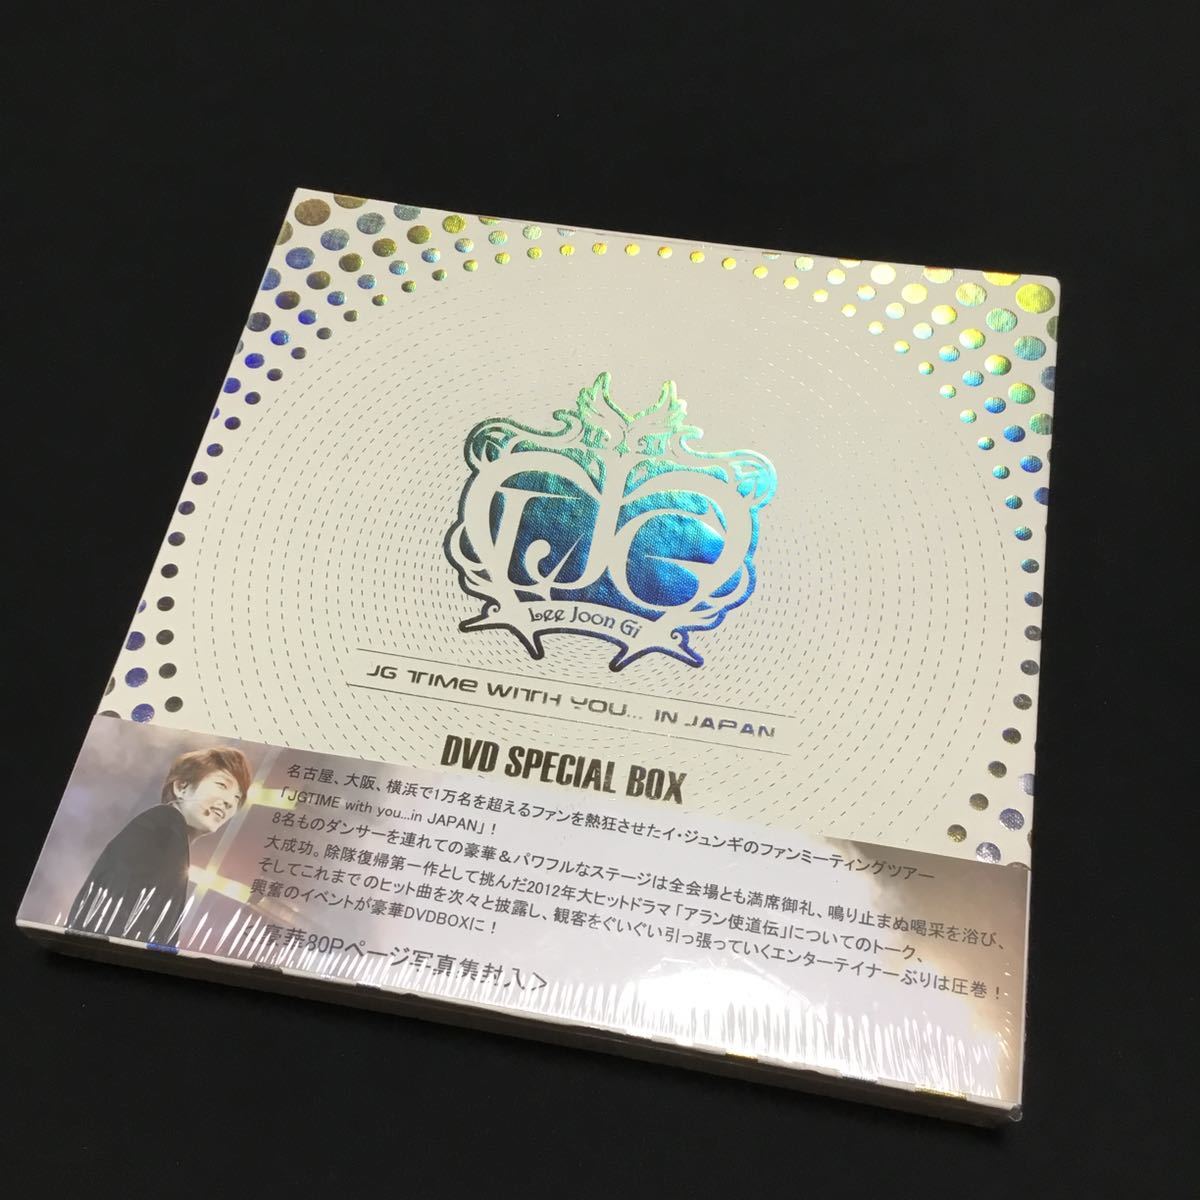 DVD 未開封 イ・ジュンギ / JG TIME WITH YOU... IN JAPAN DVD SPECIAL BOX PROP-3016 2枚組 希少